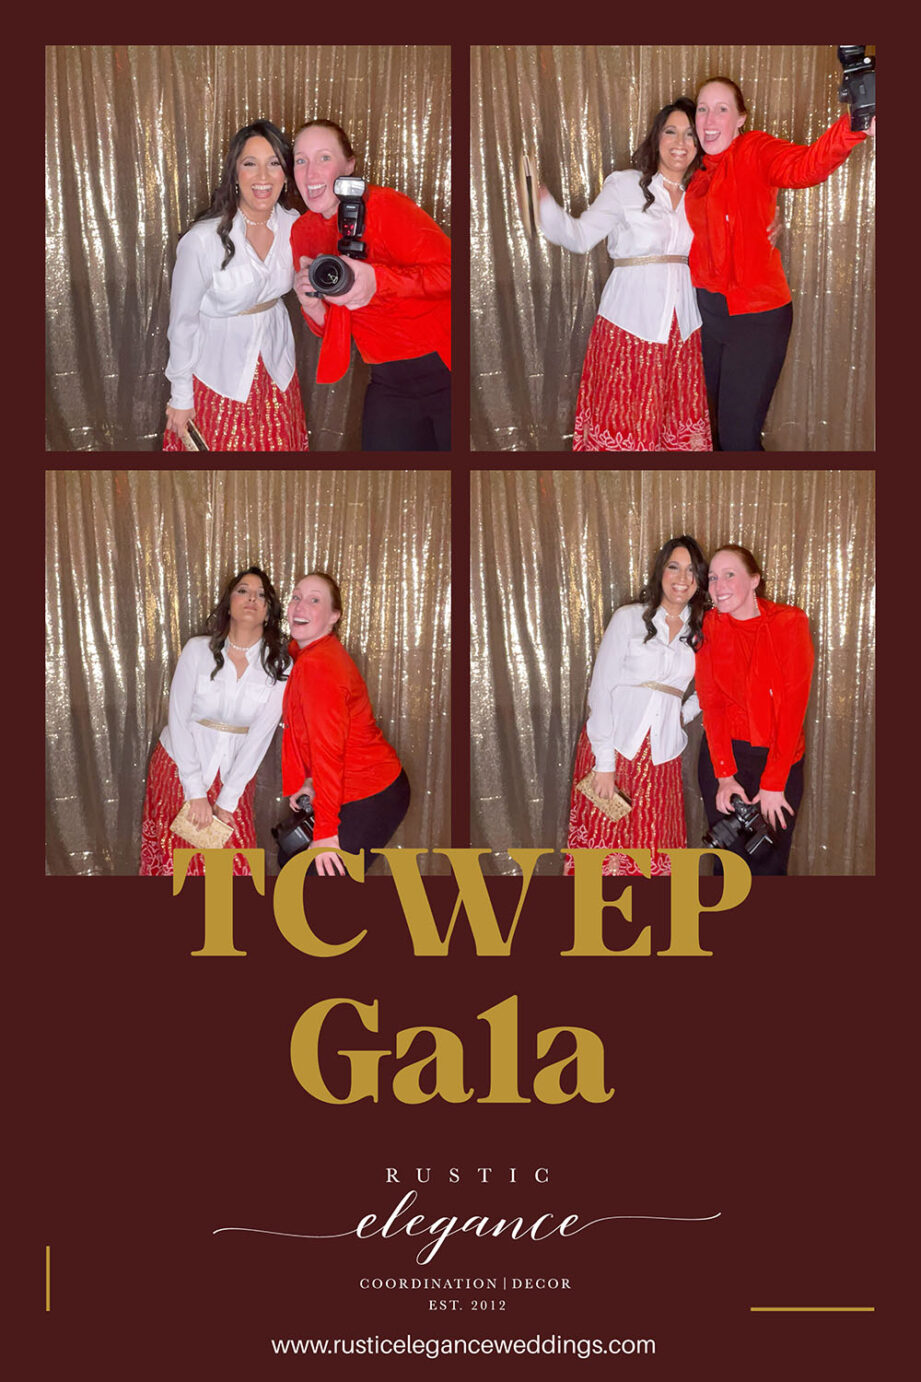 Event Photobooth Images Twin Cities Rustic elegance